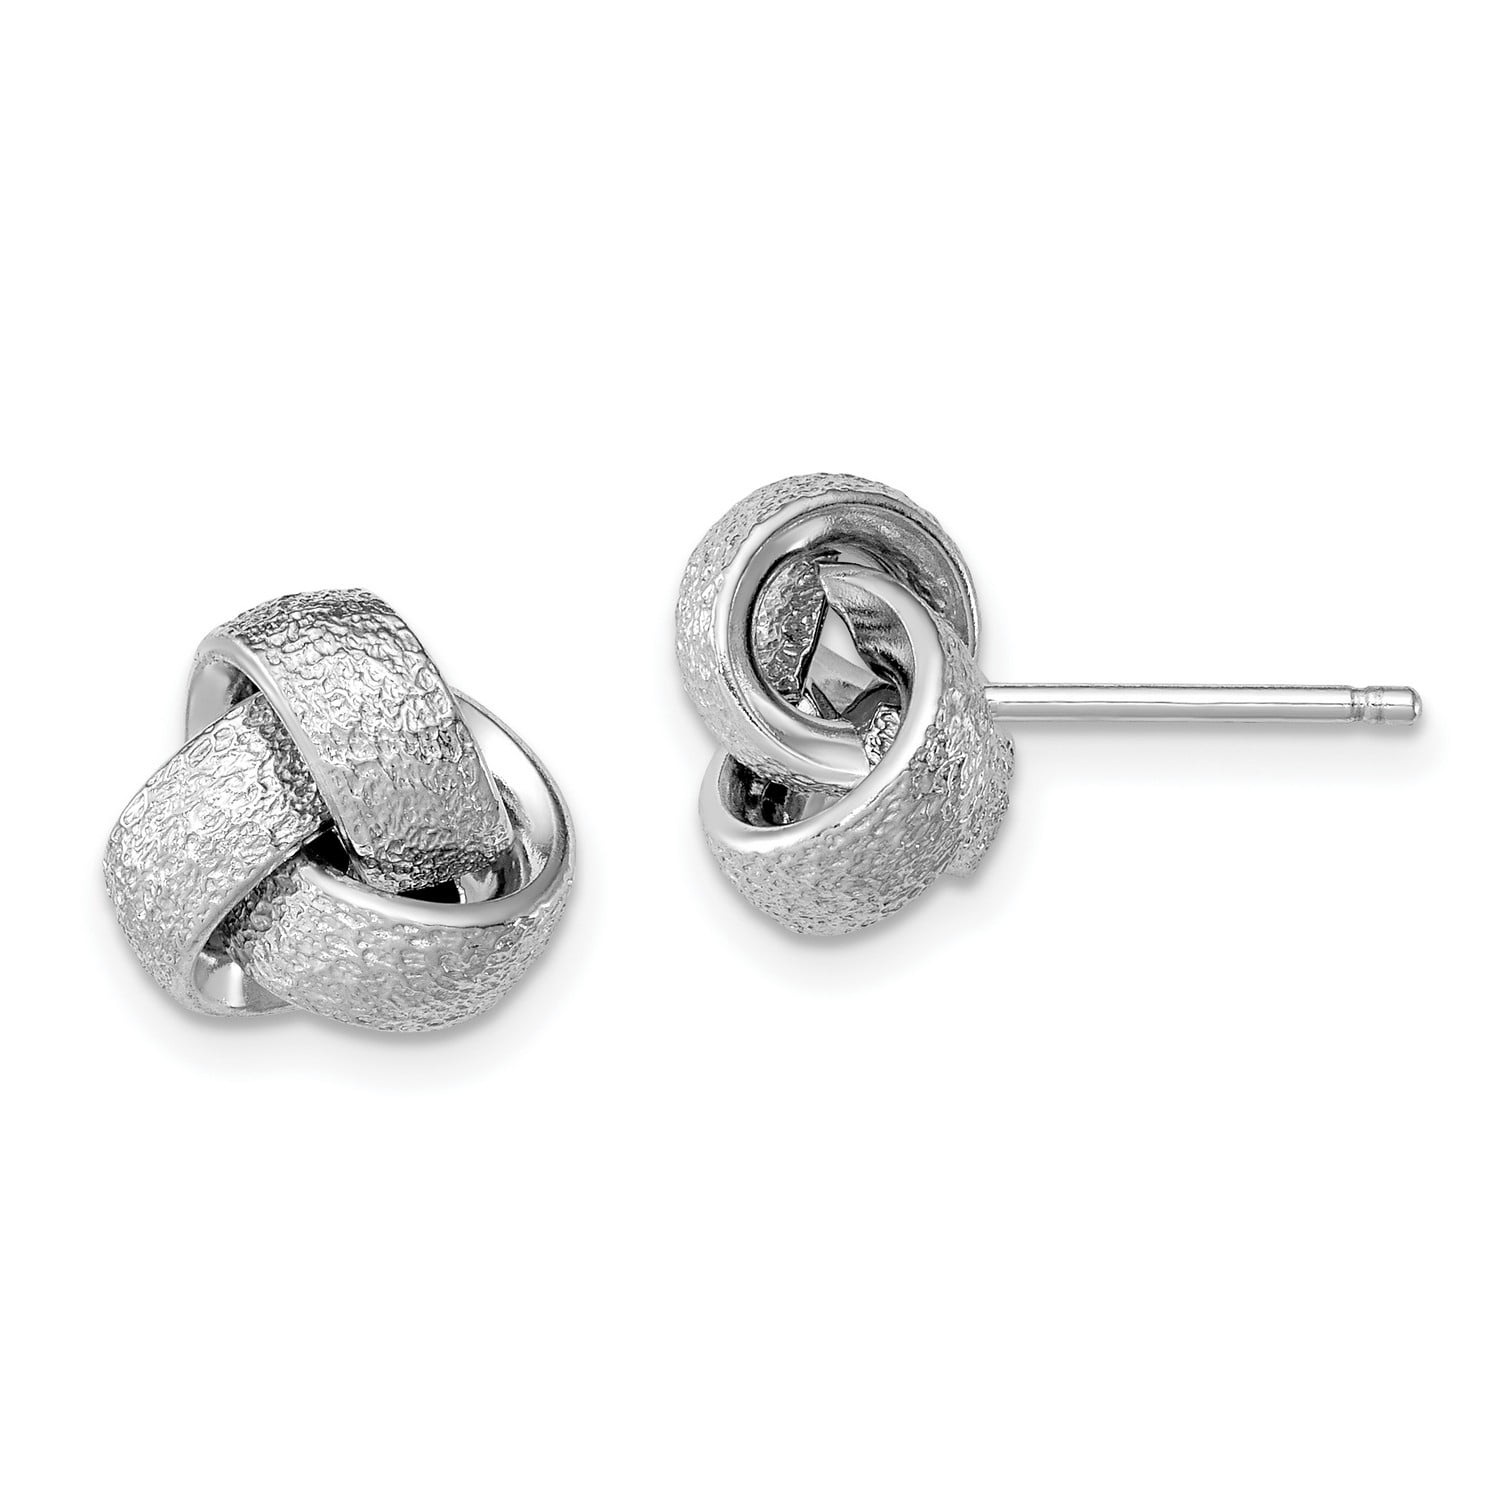 Approximately 11 x 11mm Sterling Silver Polished and Satin Knot Earrings